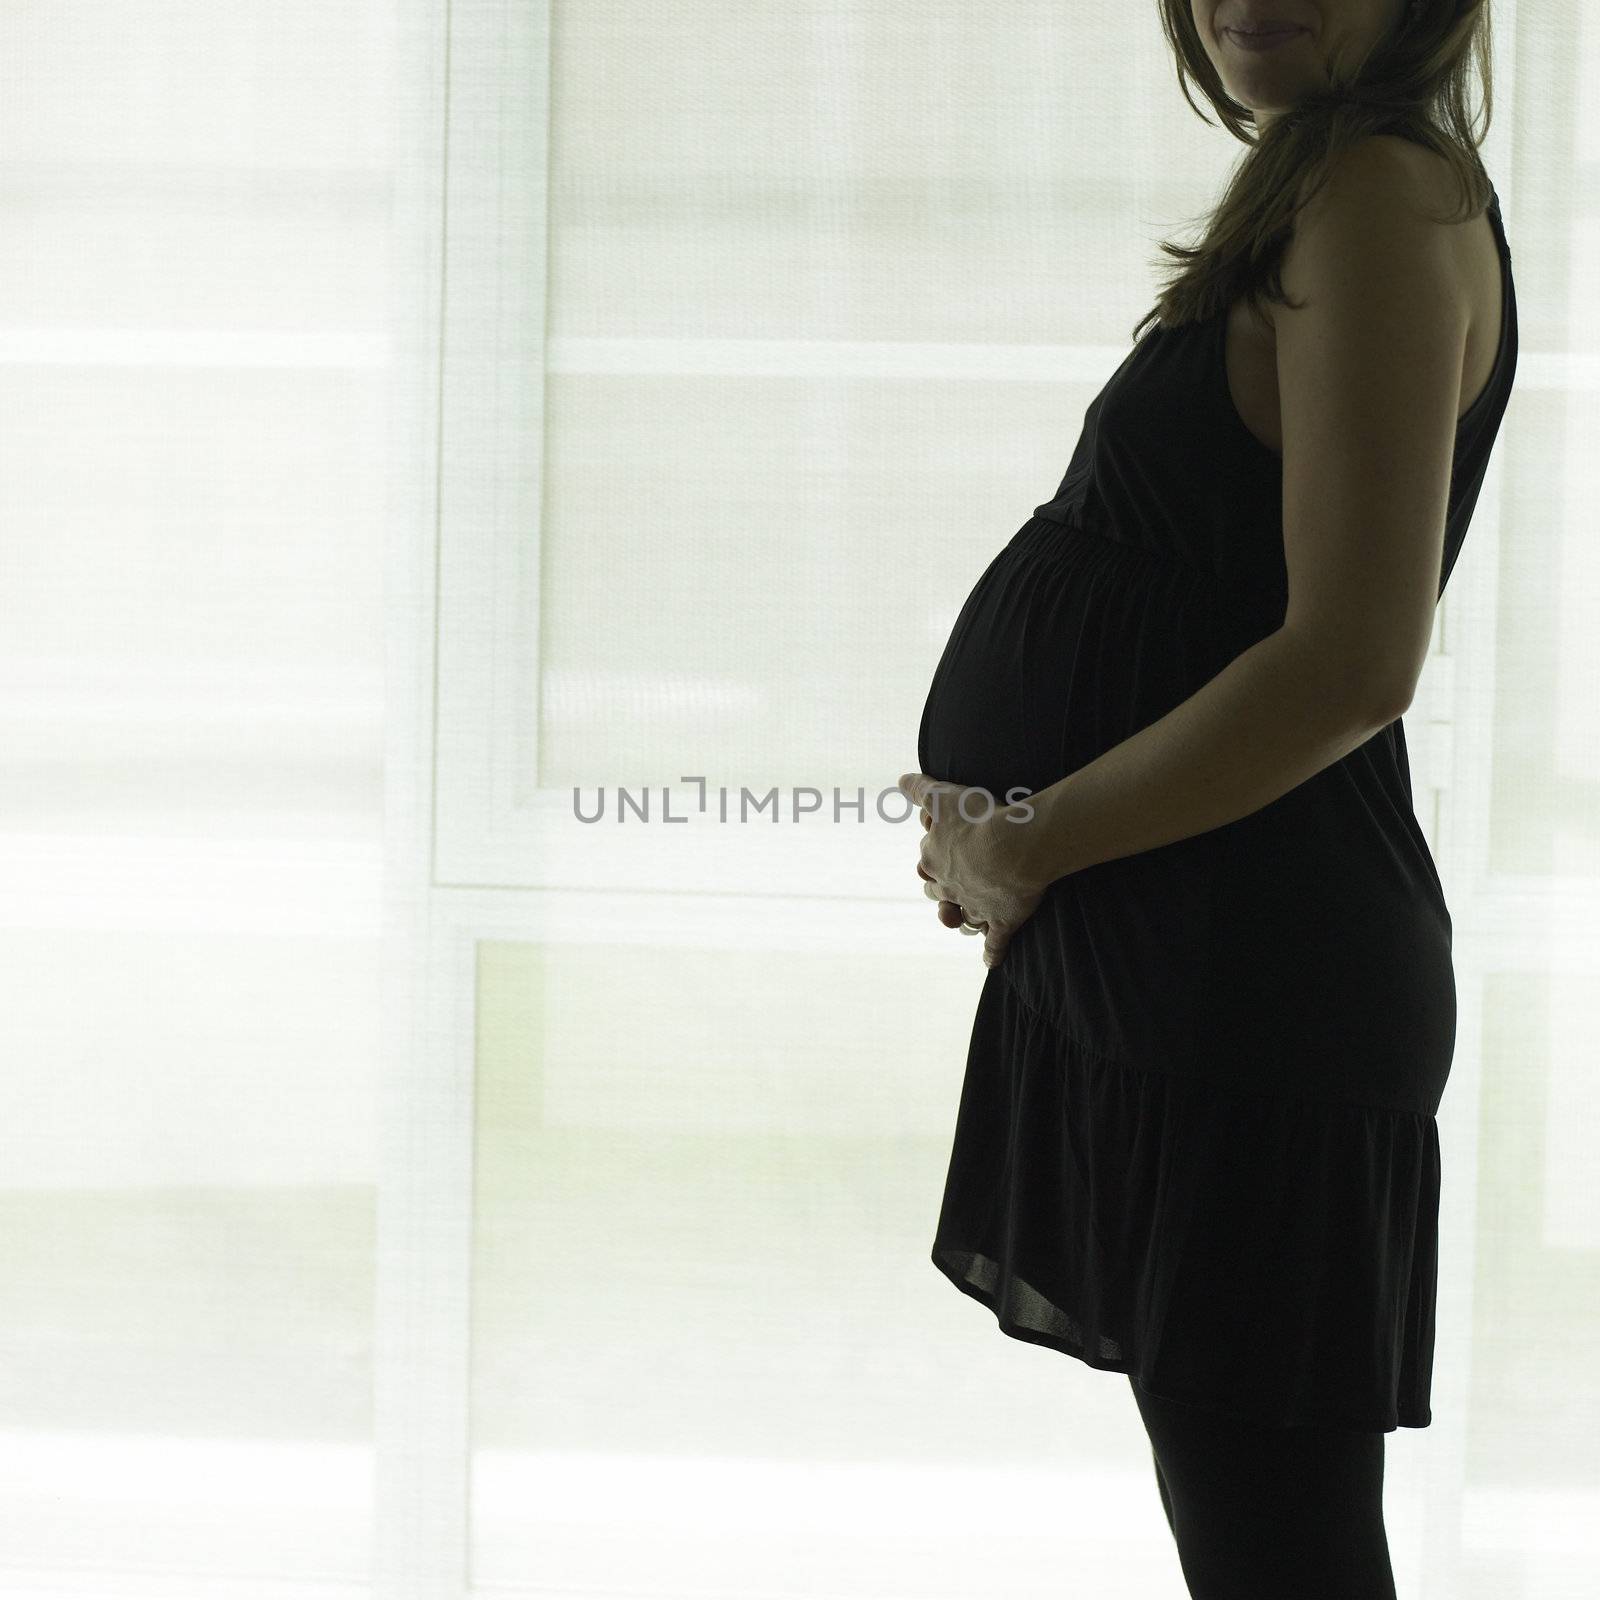 Pregnant woman by mmm